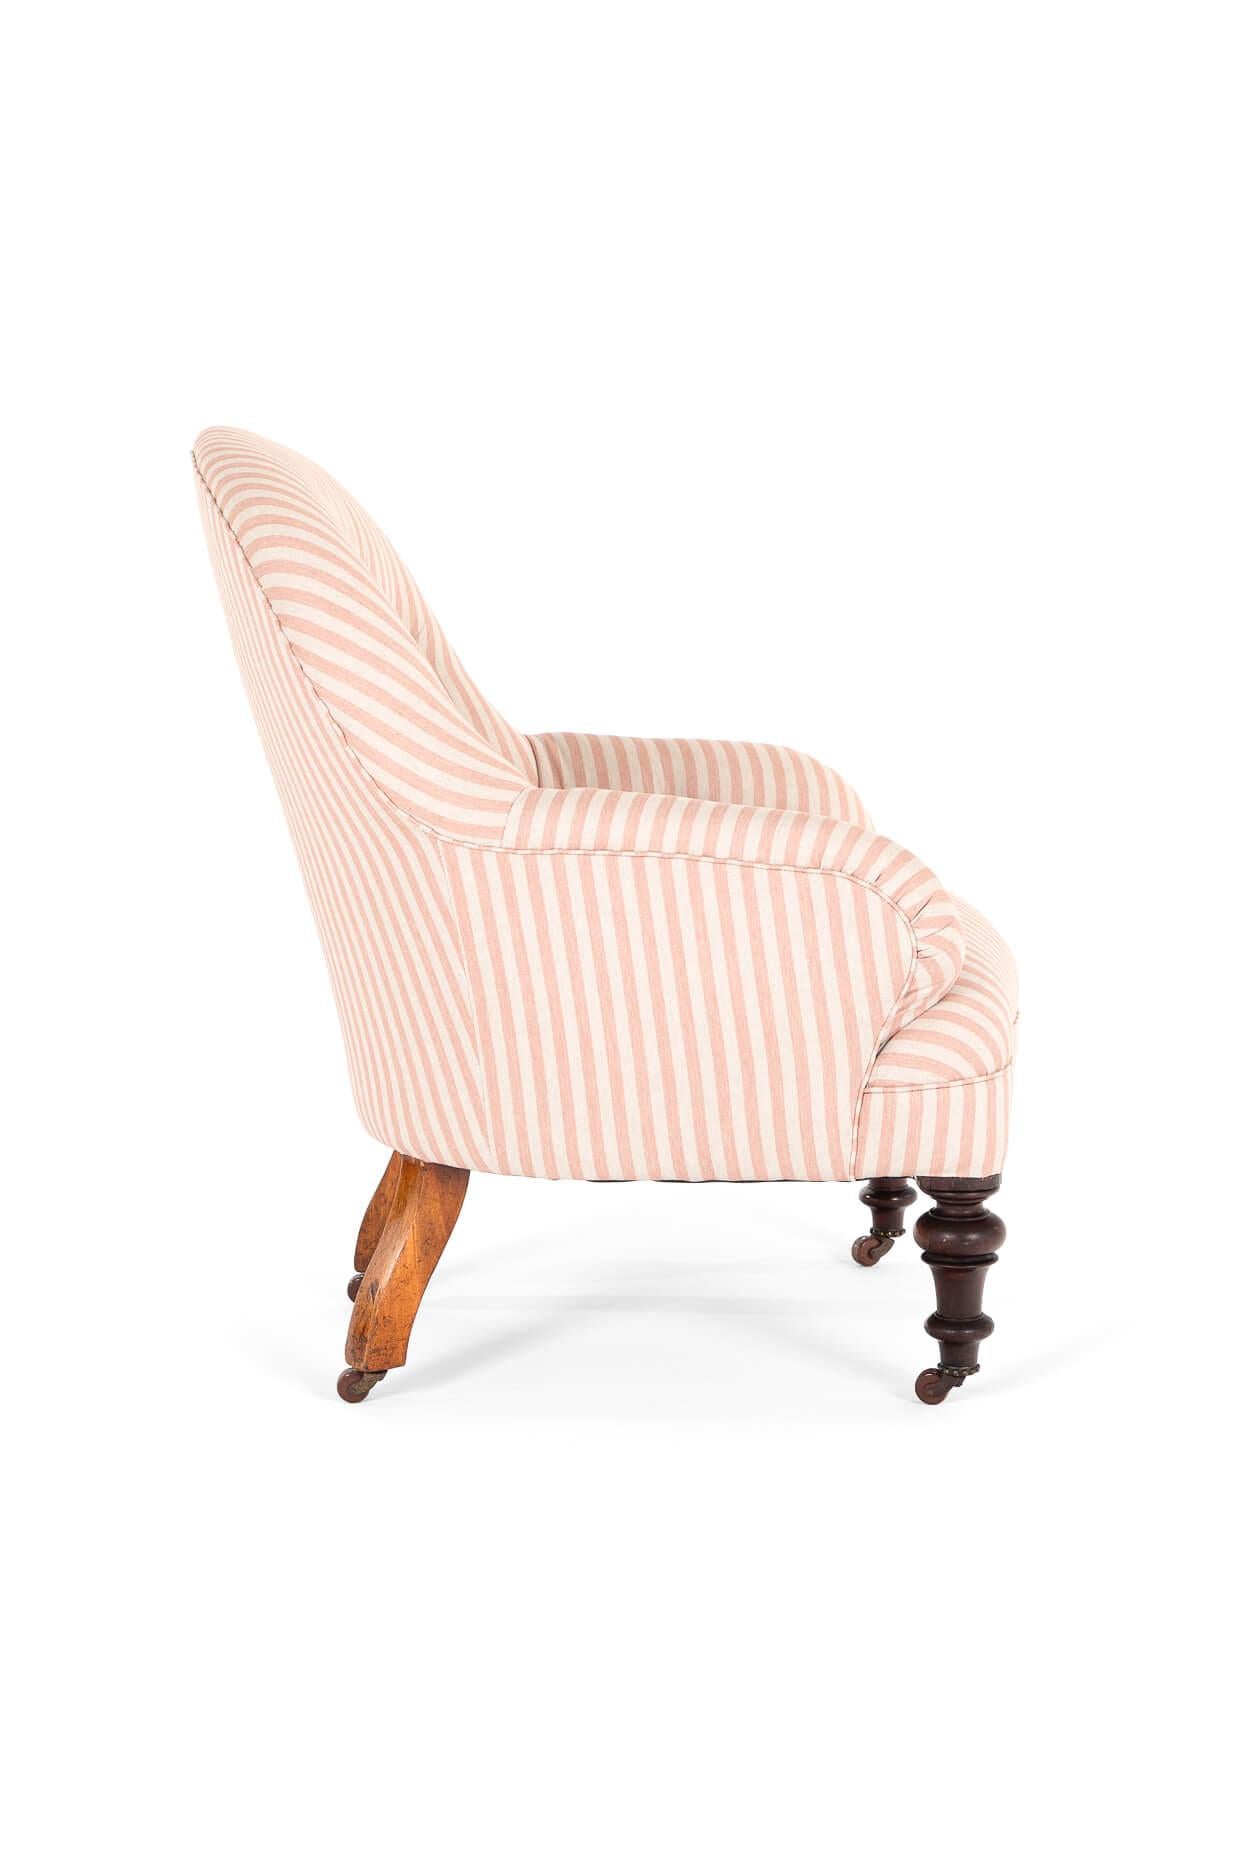 High Victorian Victorian Pink Stripe Button Back Armchair For Sale